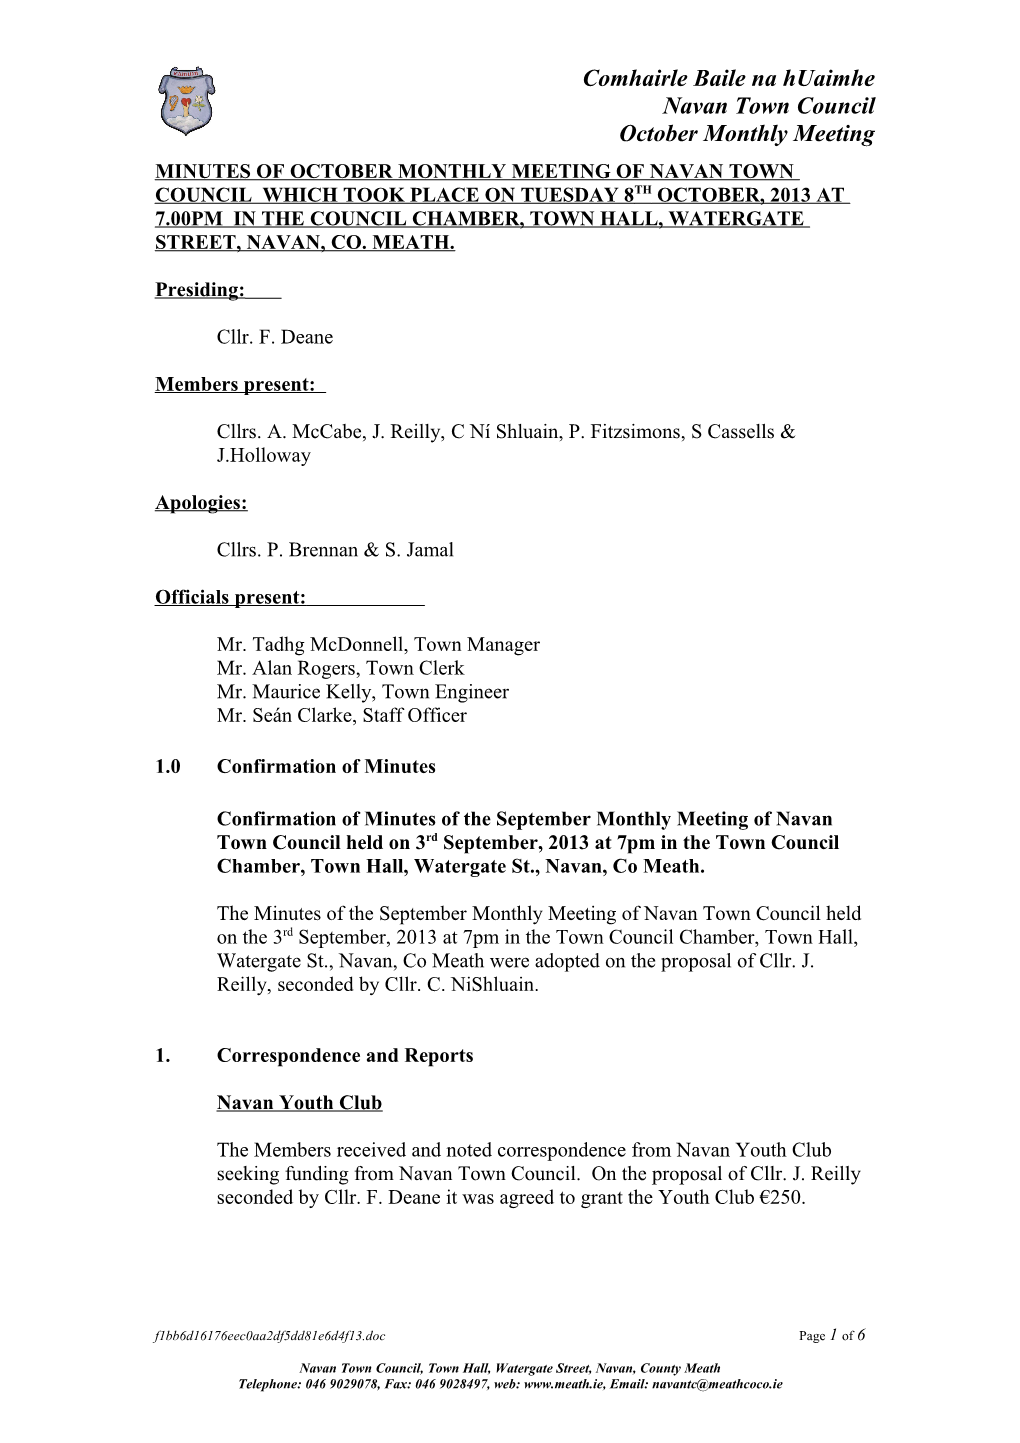 Minutes of March Monthly Meeting of Navan Town Council Which Took Place on Tuesday 1St